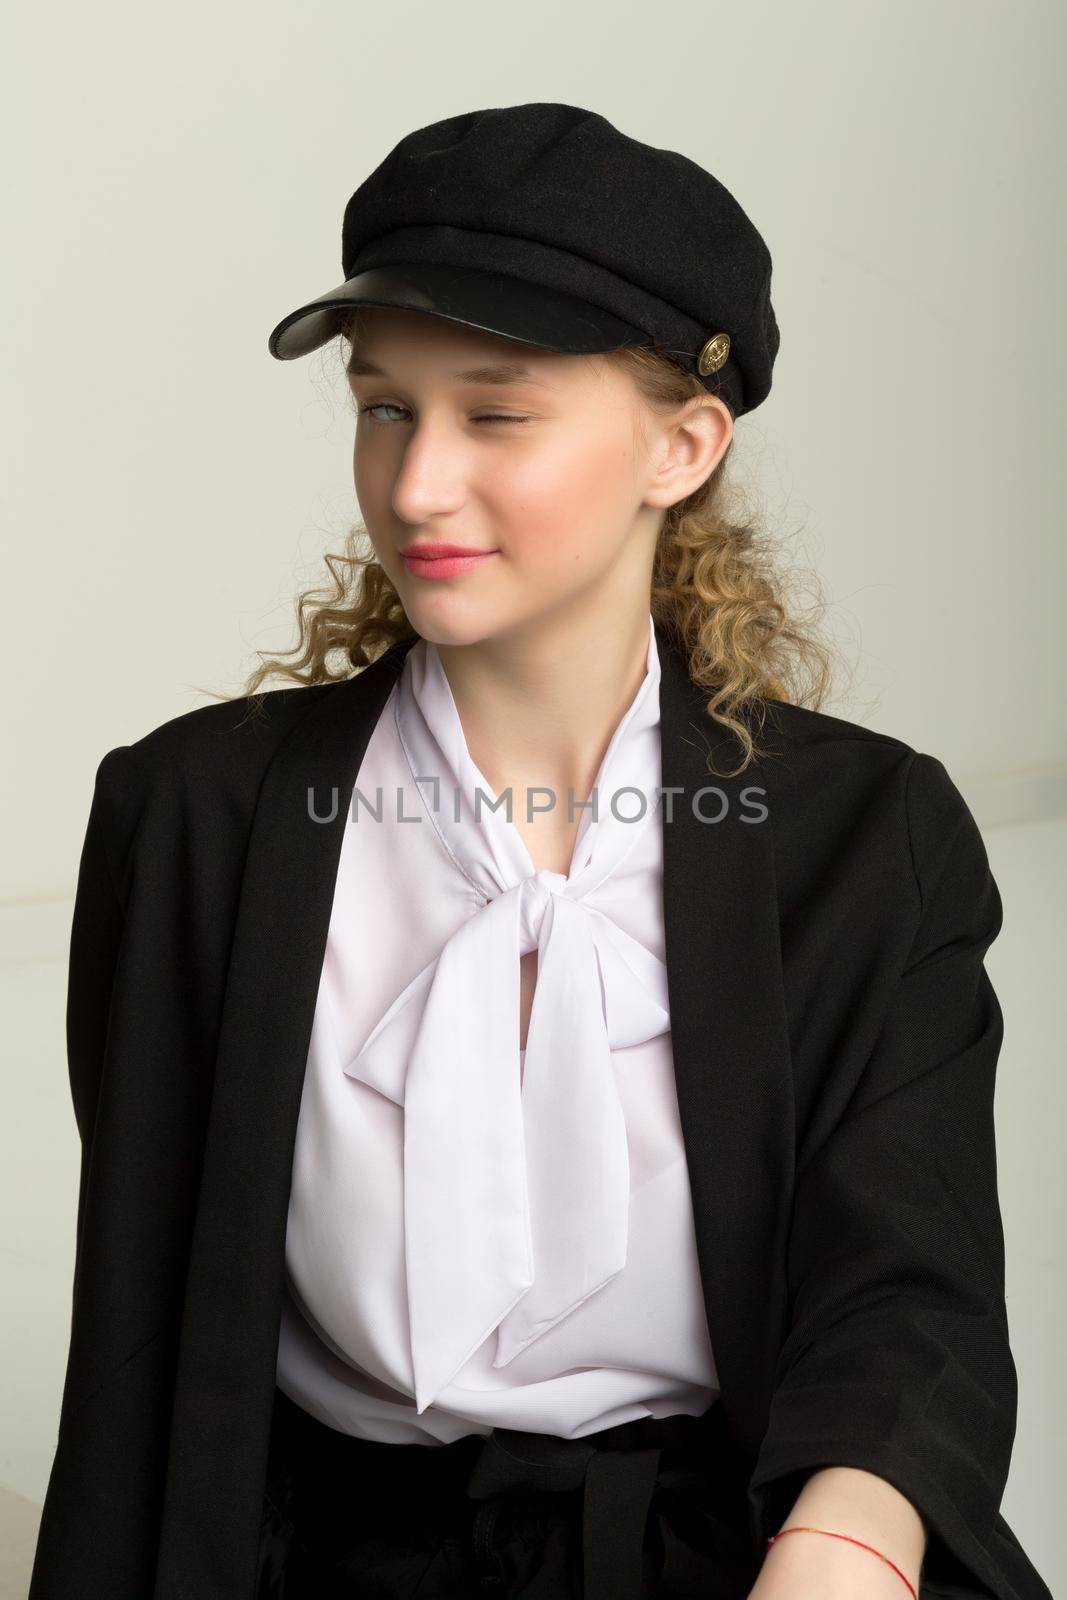 Portrait of elegant pretty girl blinking one eye. Beautiful stylish young woman in fashionable black blazer, white blouse and cap blinking at camera in playful manner against gray background in studio